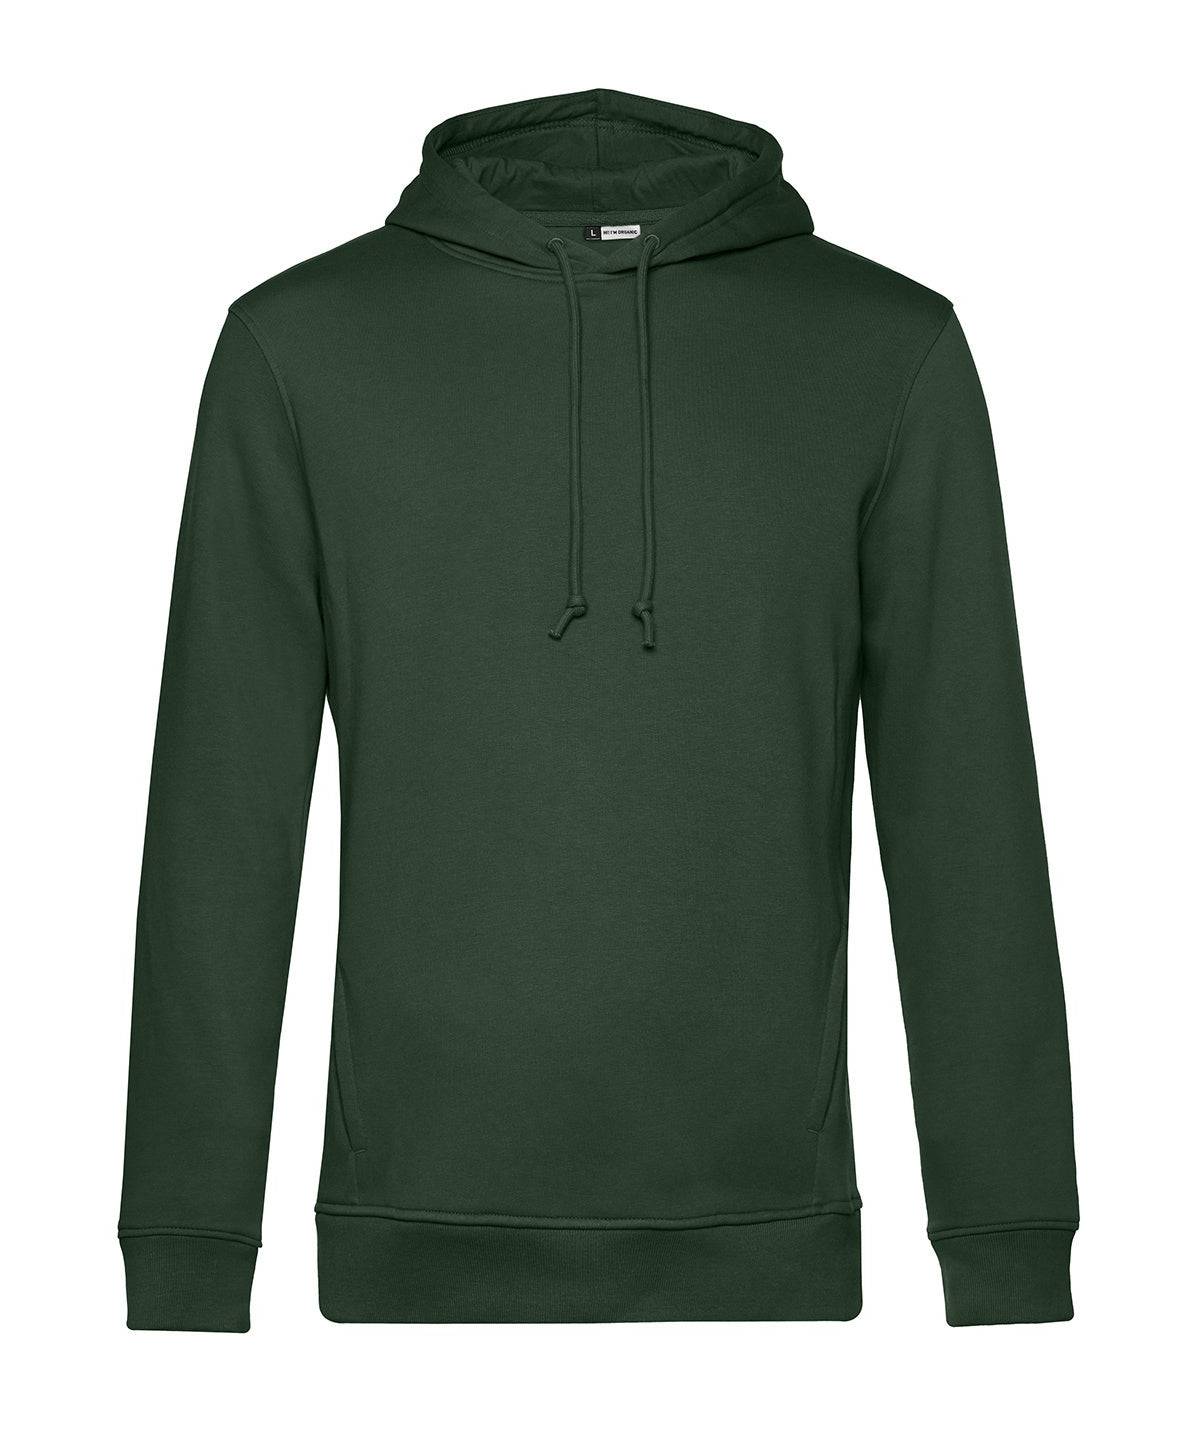 Forest Green - B&C Inspire Hooded